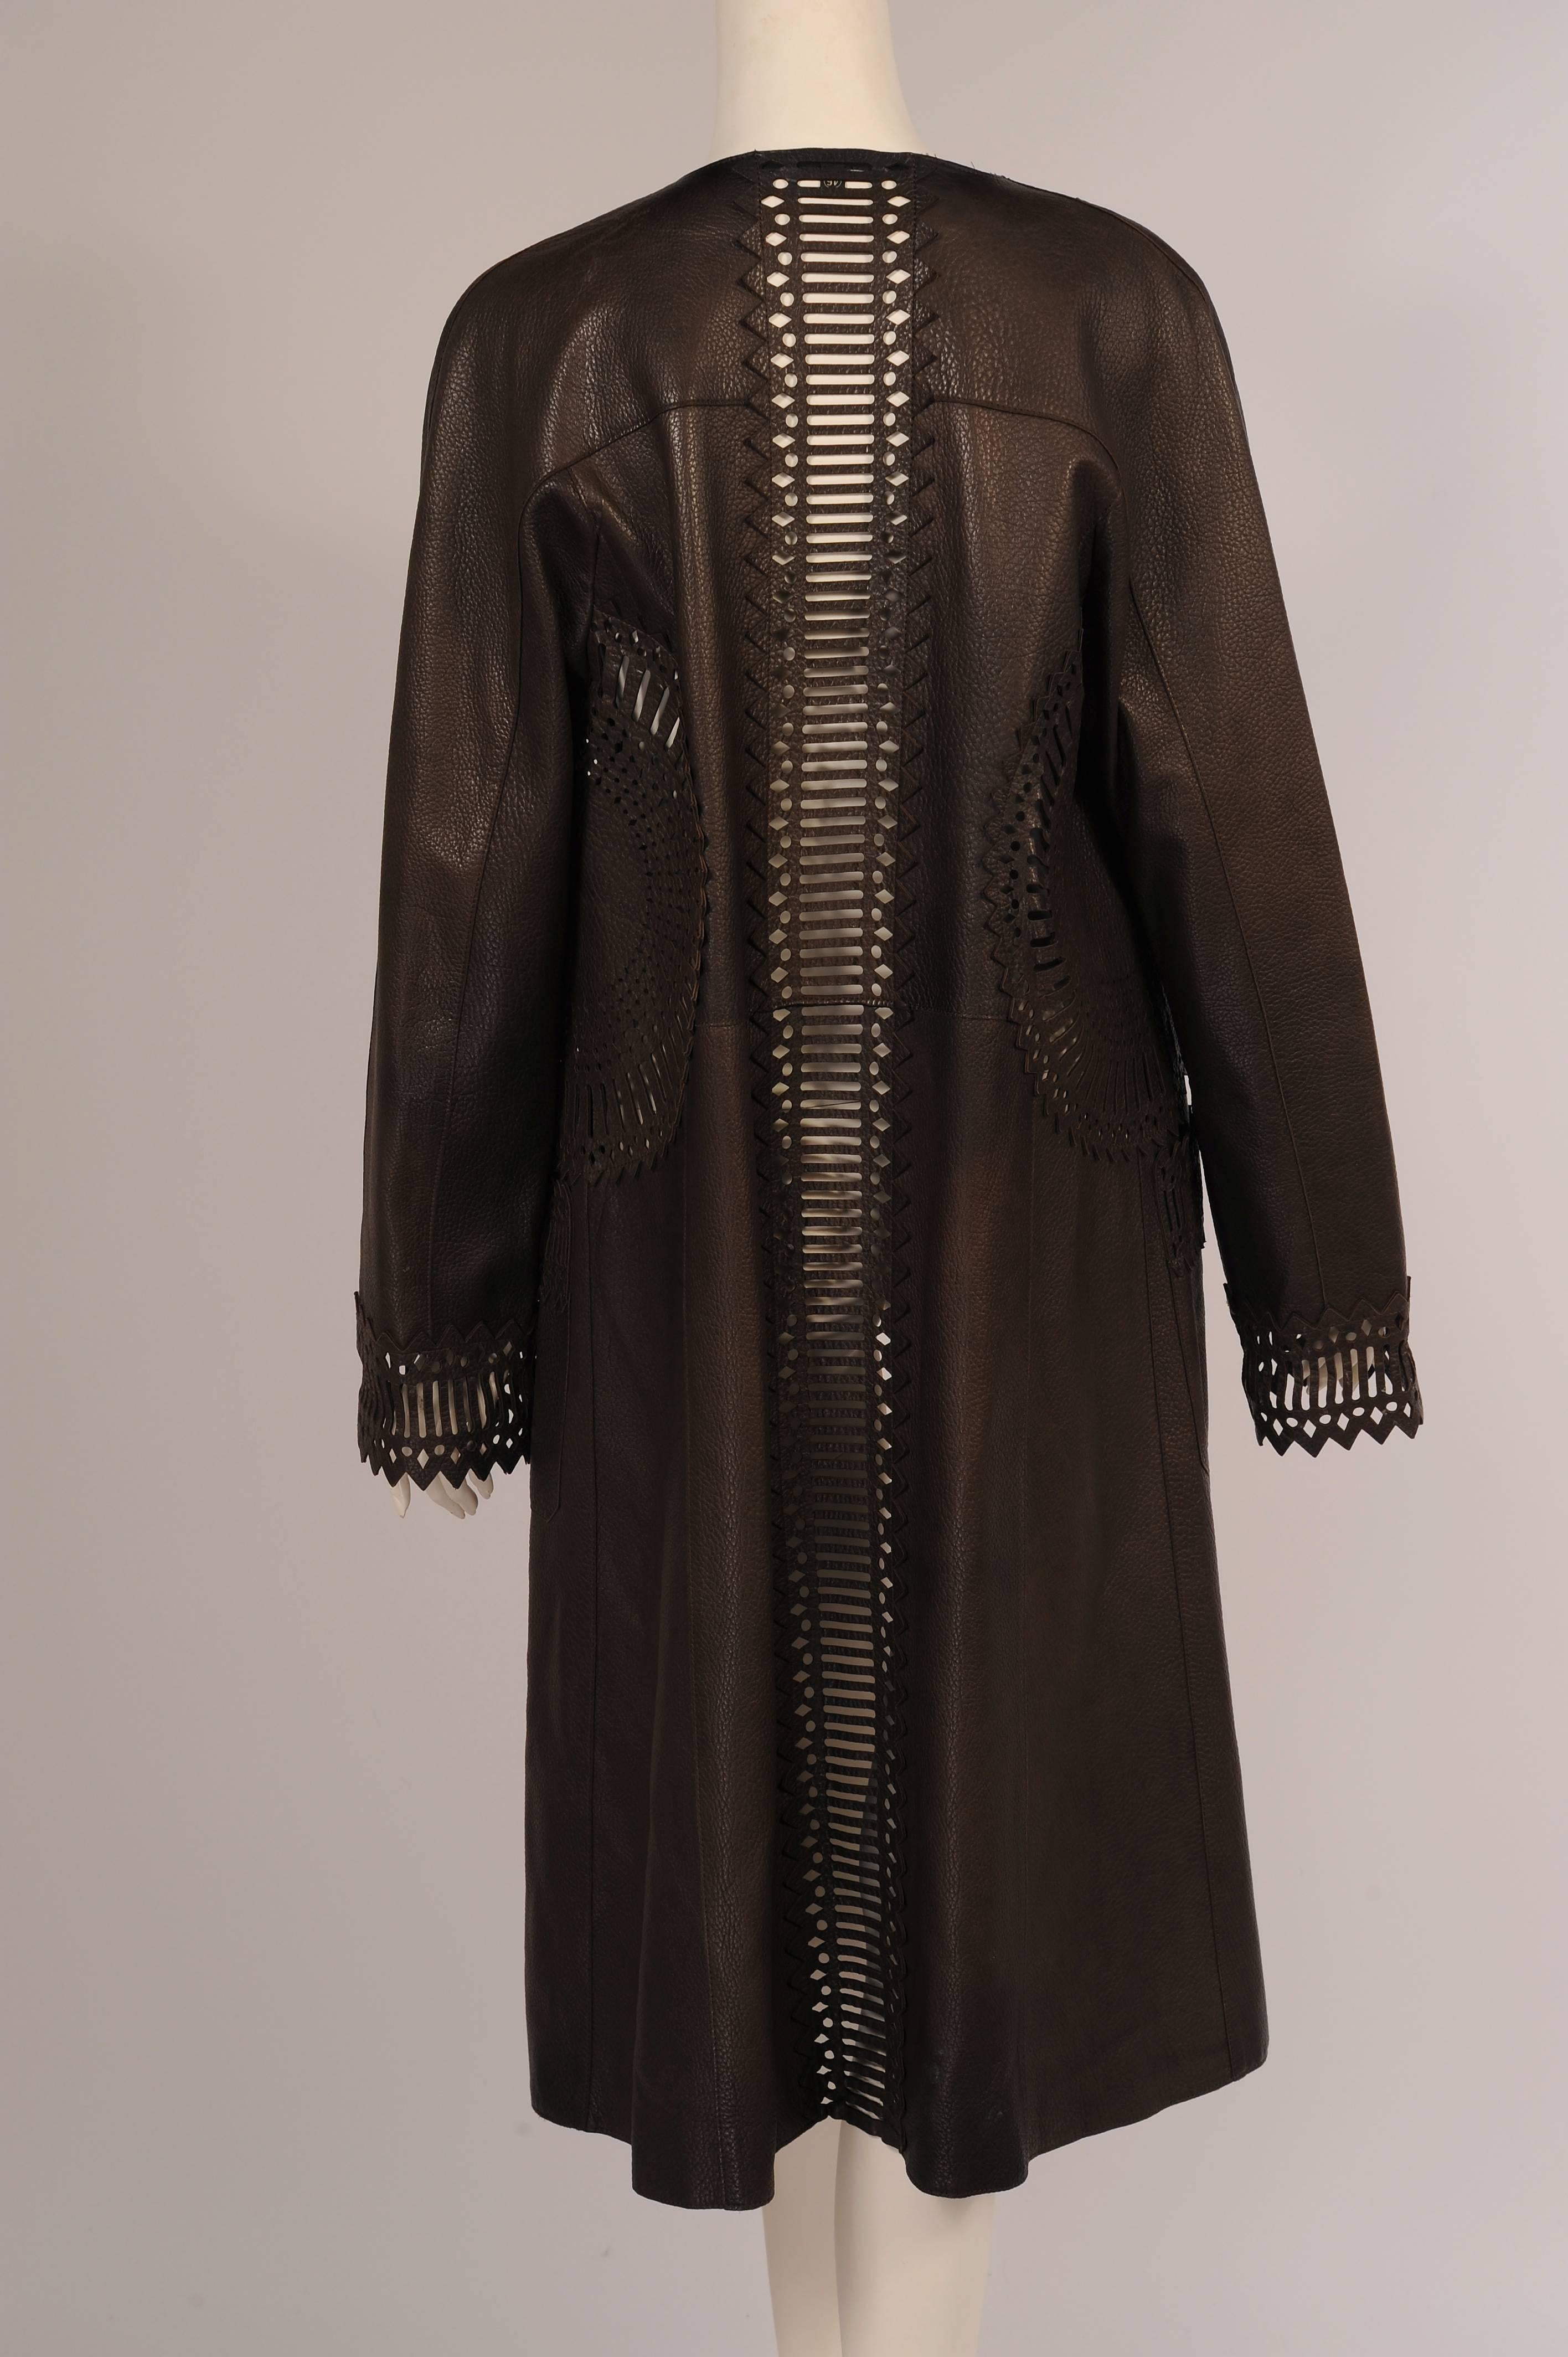 Black Gianfranco Ferre Chocolate Brown Supple Leather Coat with Pierced Decoration 